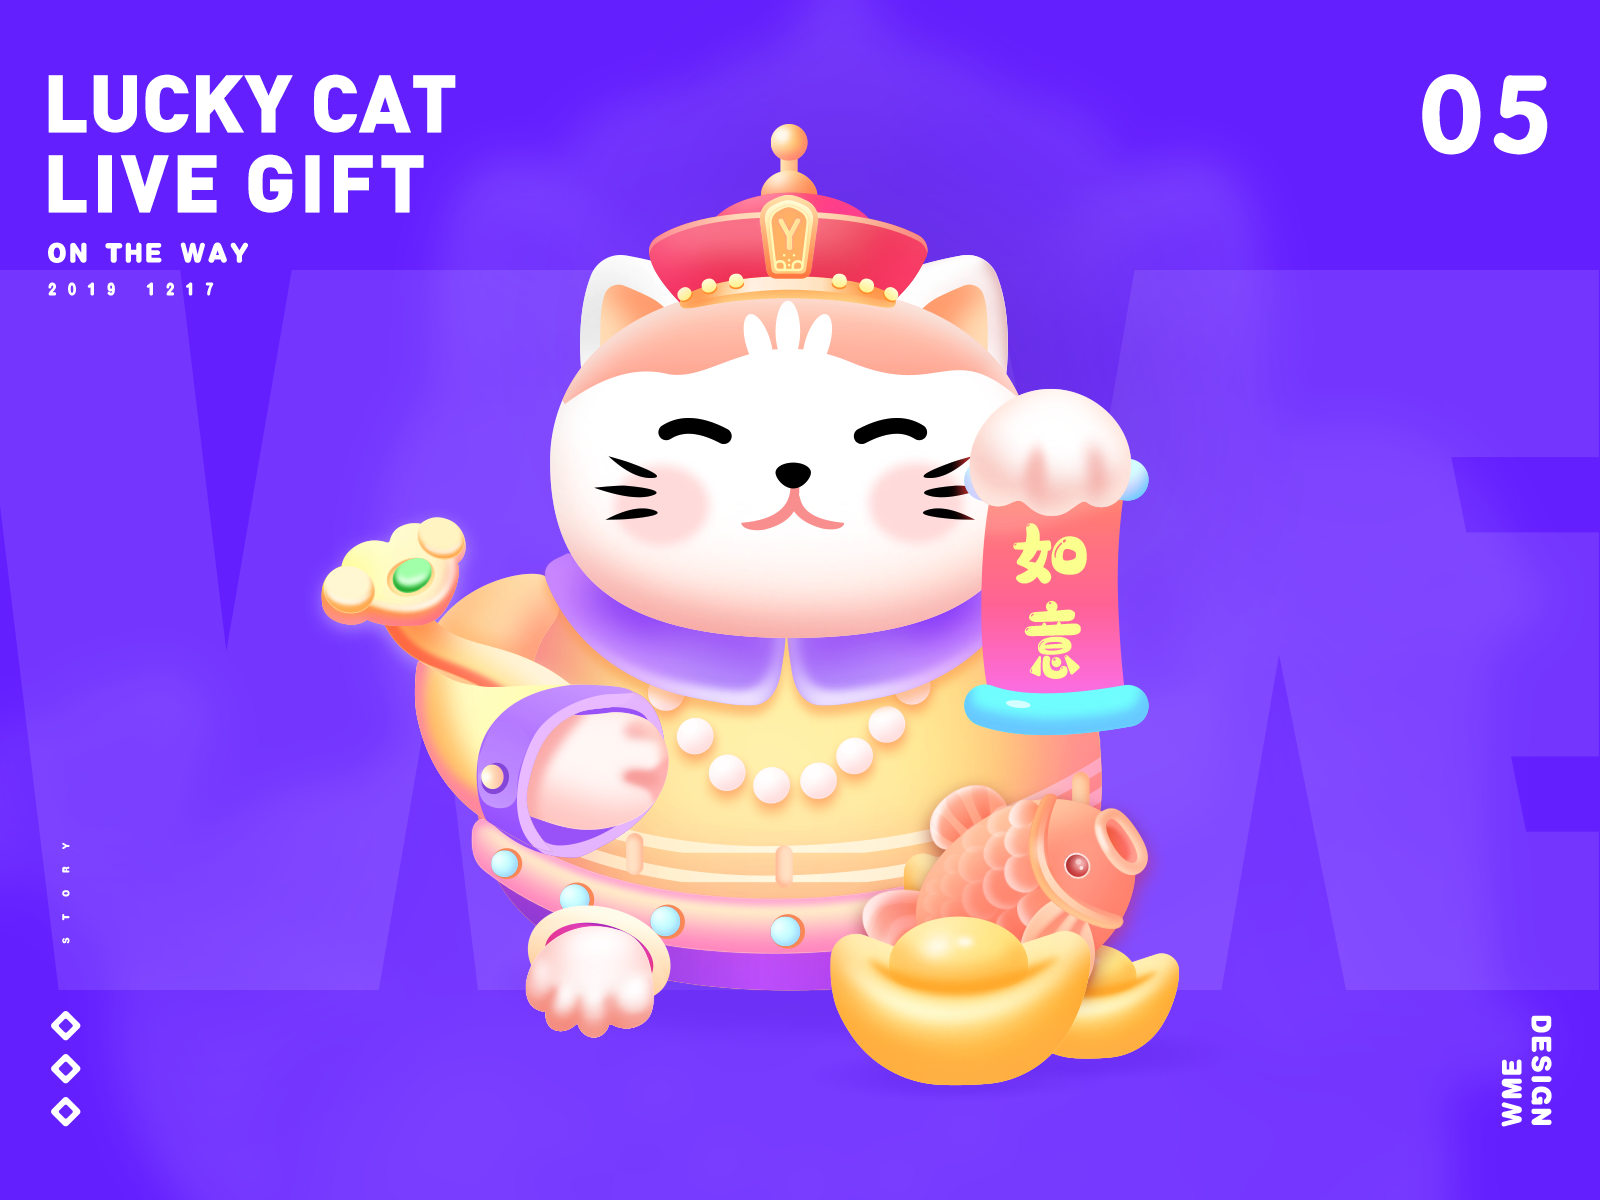 LUCKY CAT 03-LIVE GIFT affinity designer cat design illustration image lucky cat wme yellow